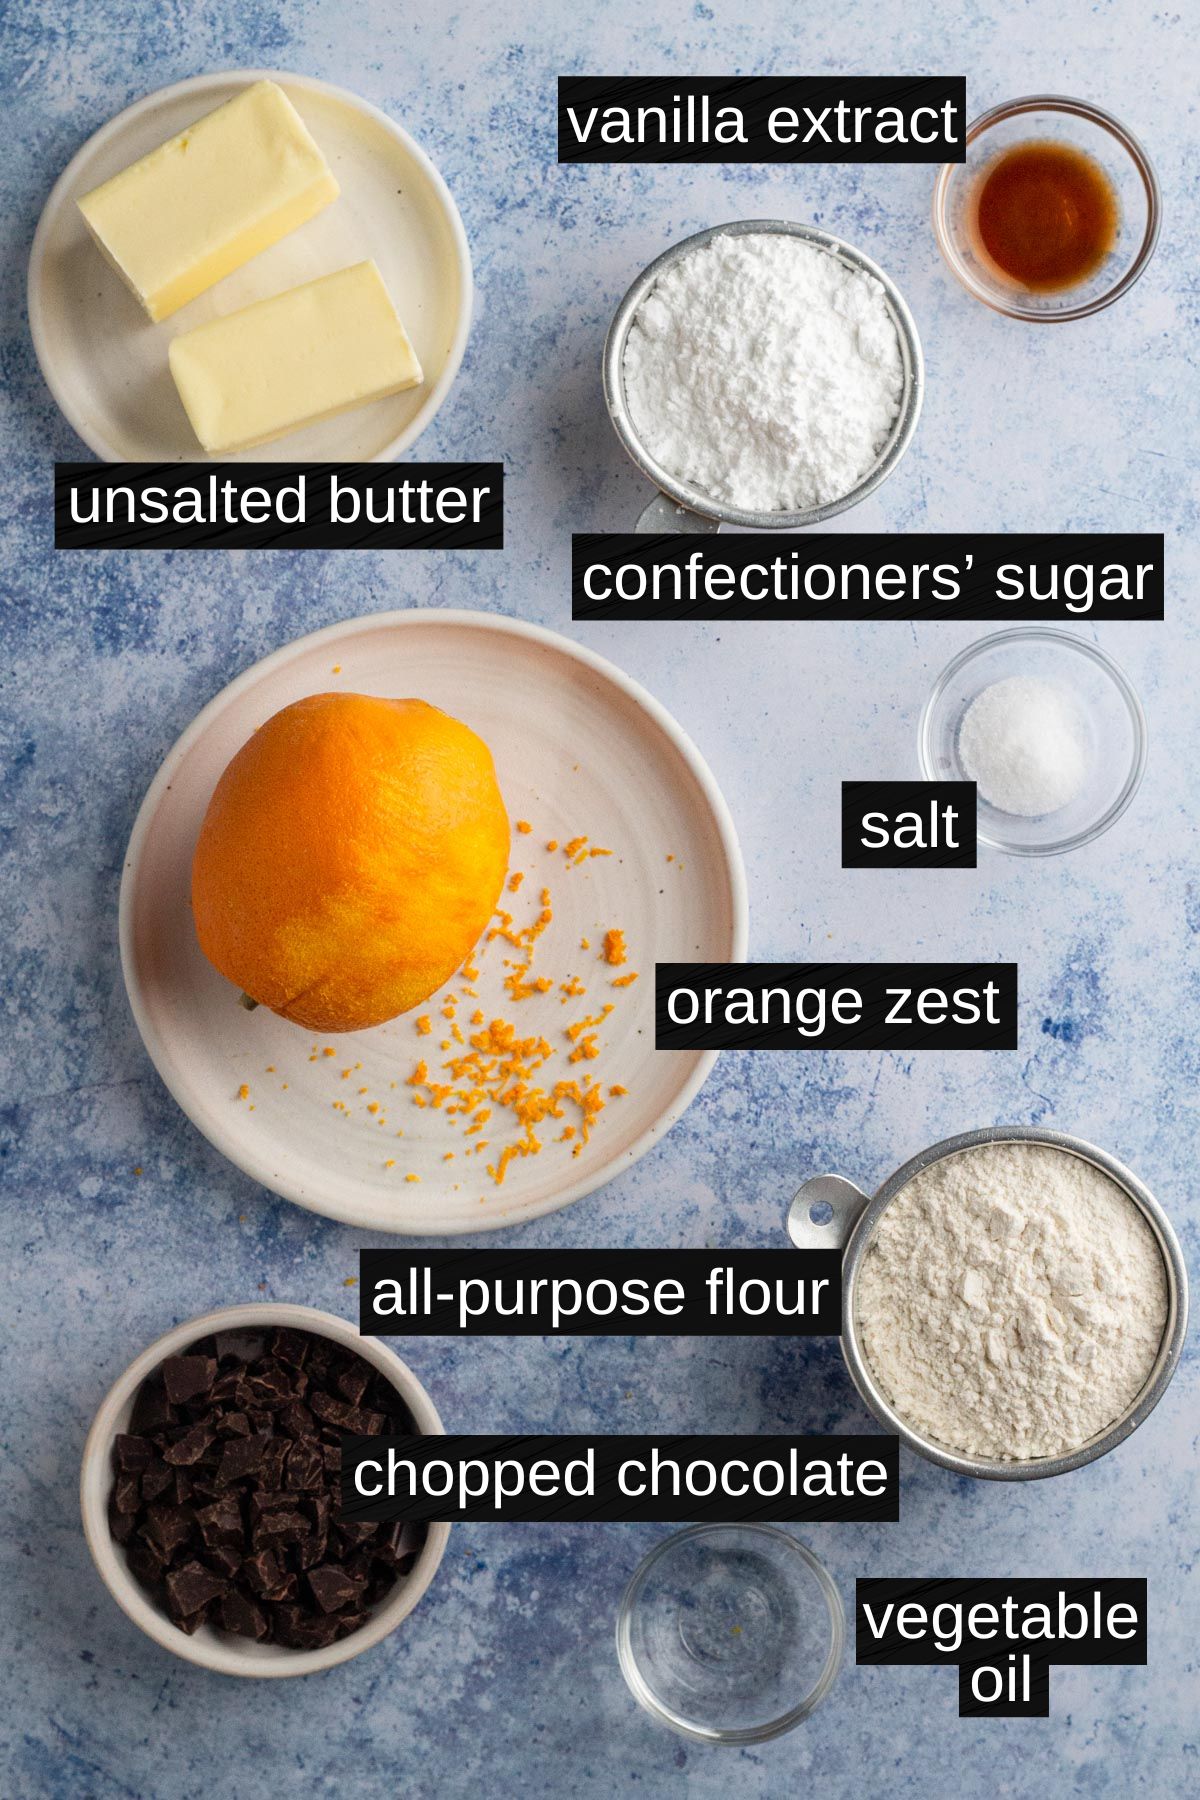 Recipe ingredients with labels on a blue background.